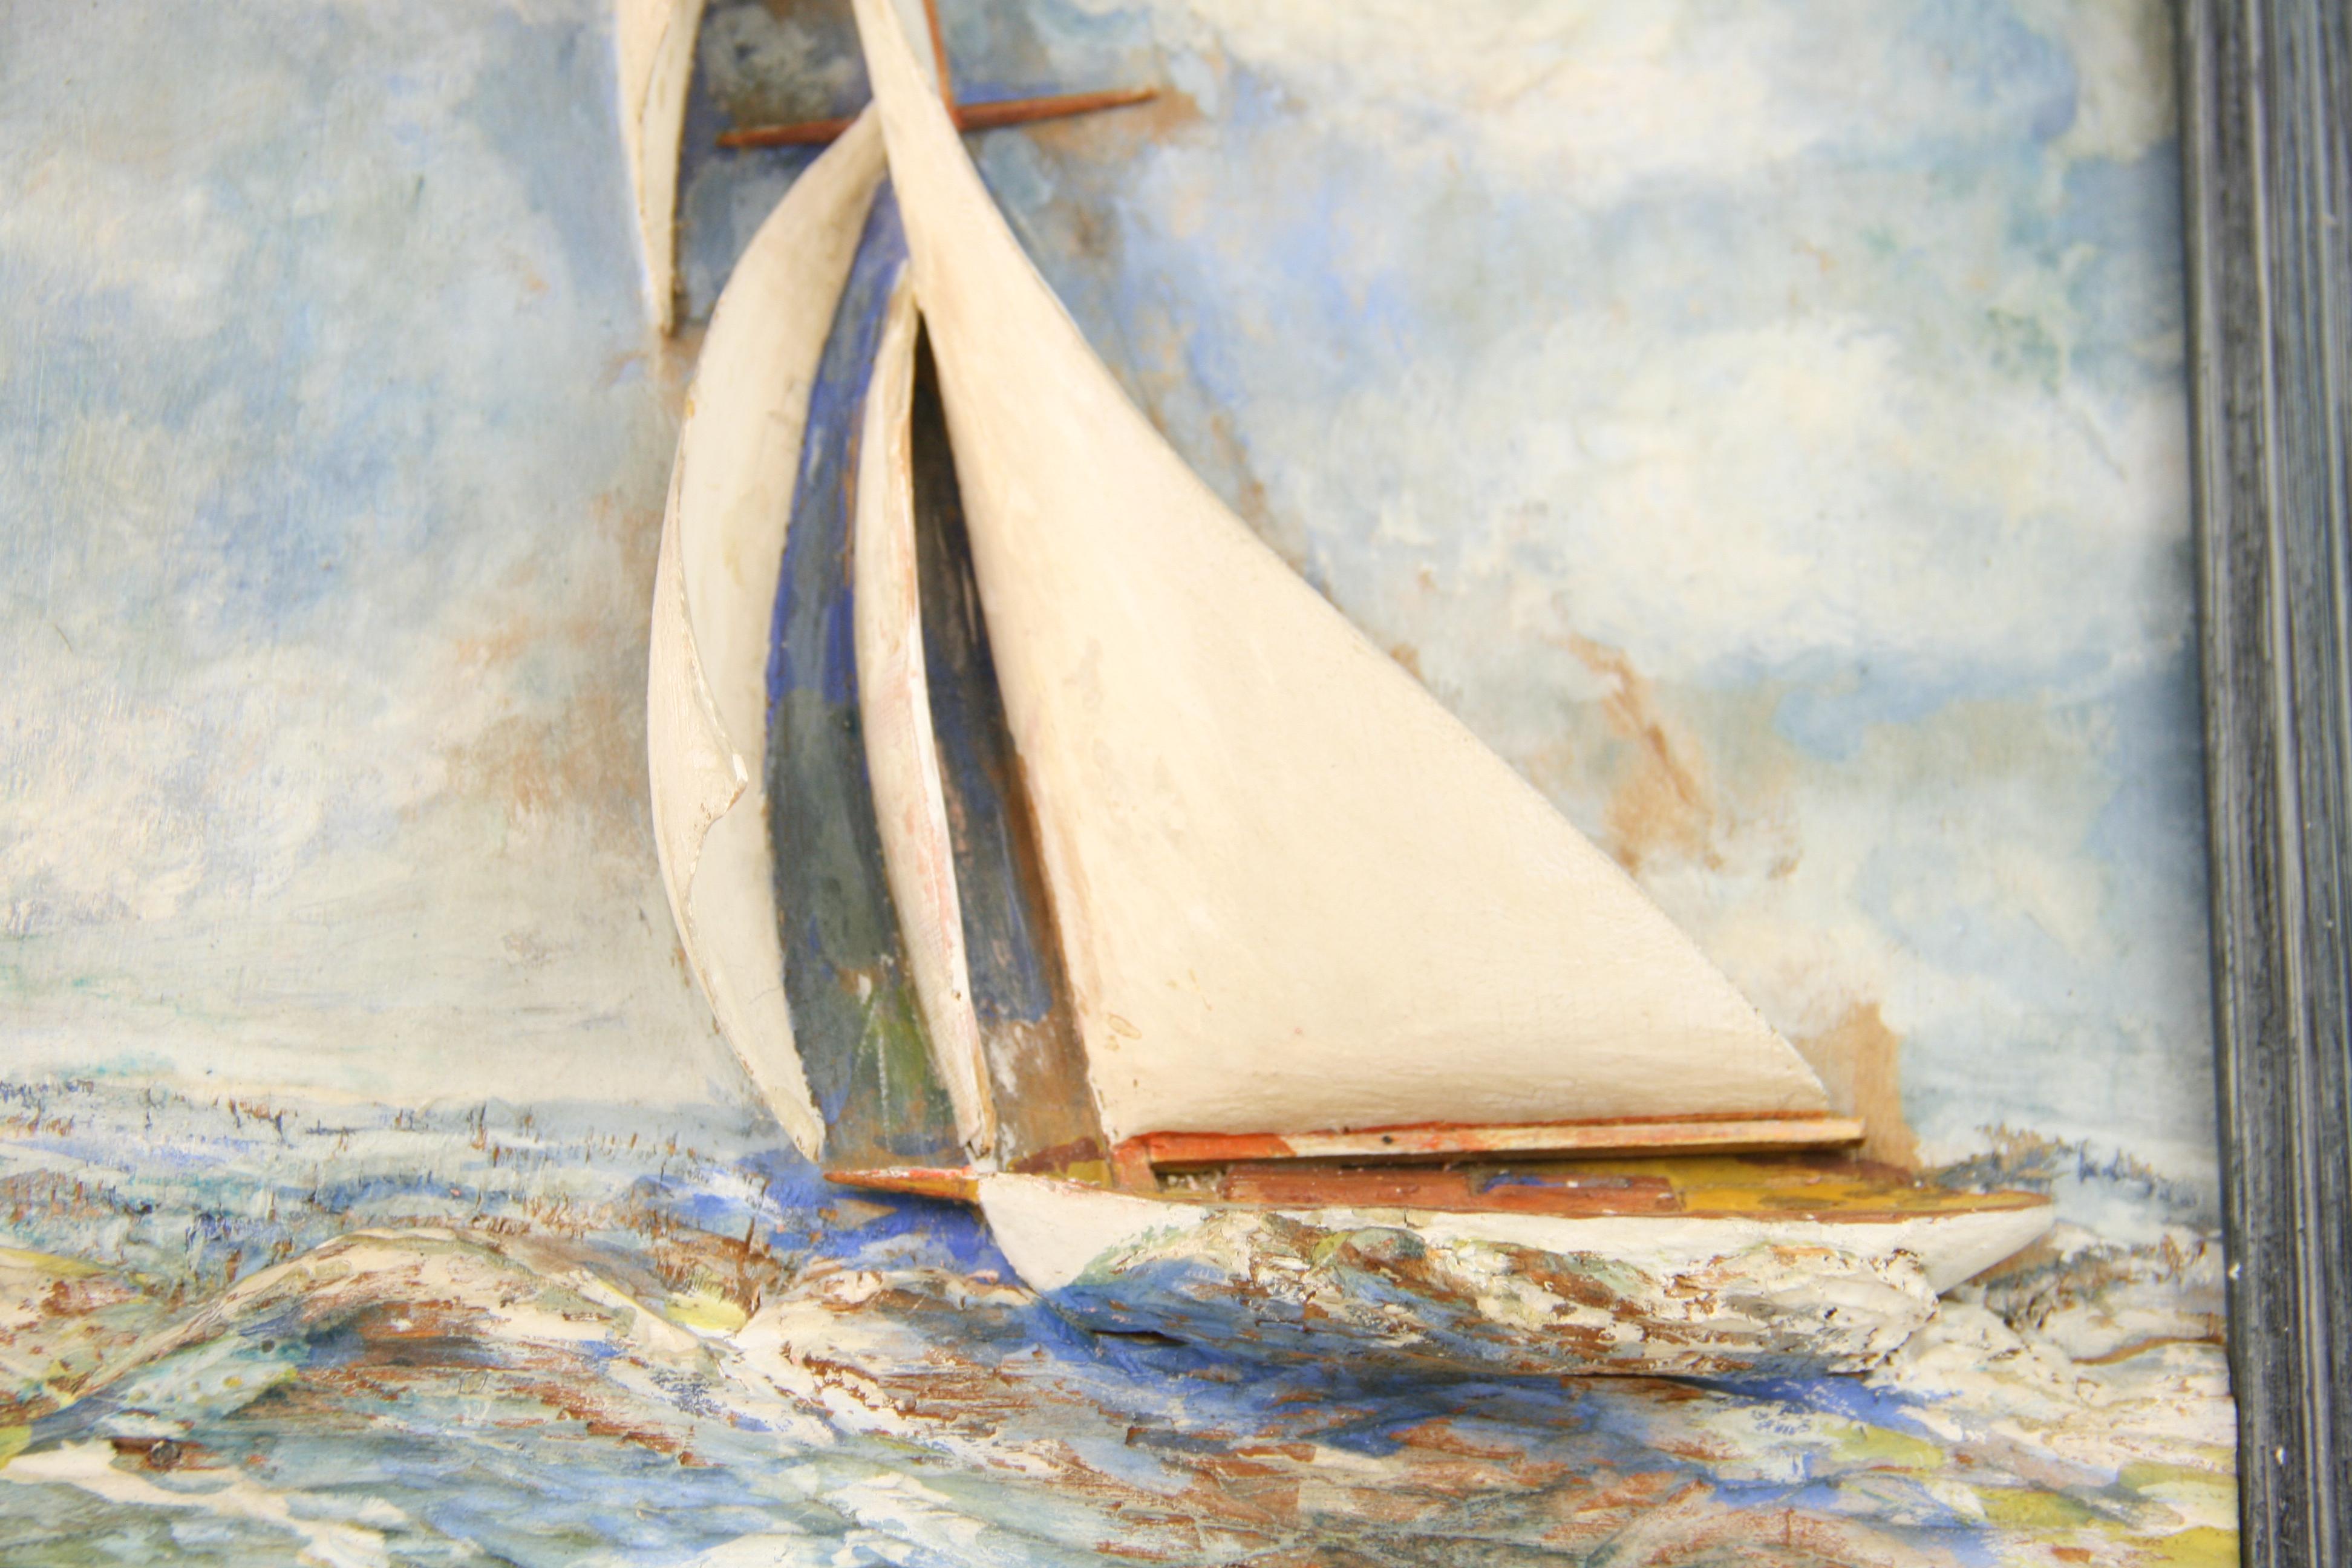 5-3506 Hand carved sailing diorama wood and oil paint.
Signed on verso Esposito 1920
Set in a new wood frame